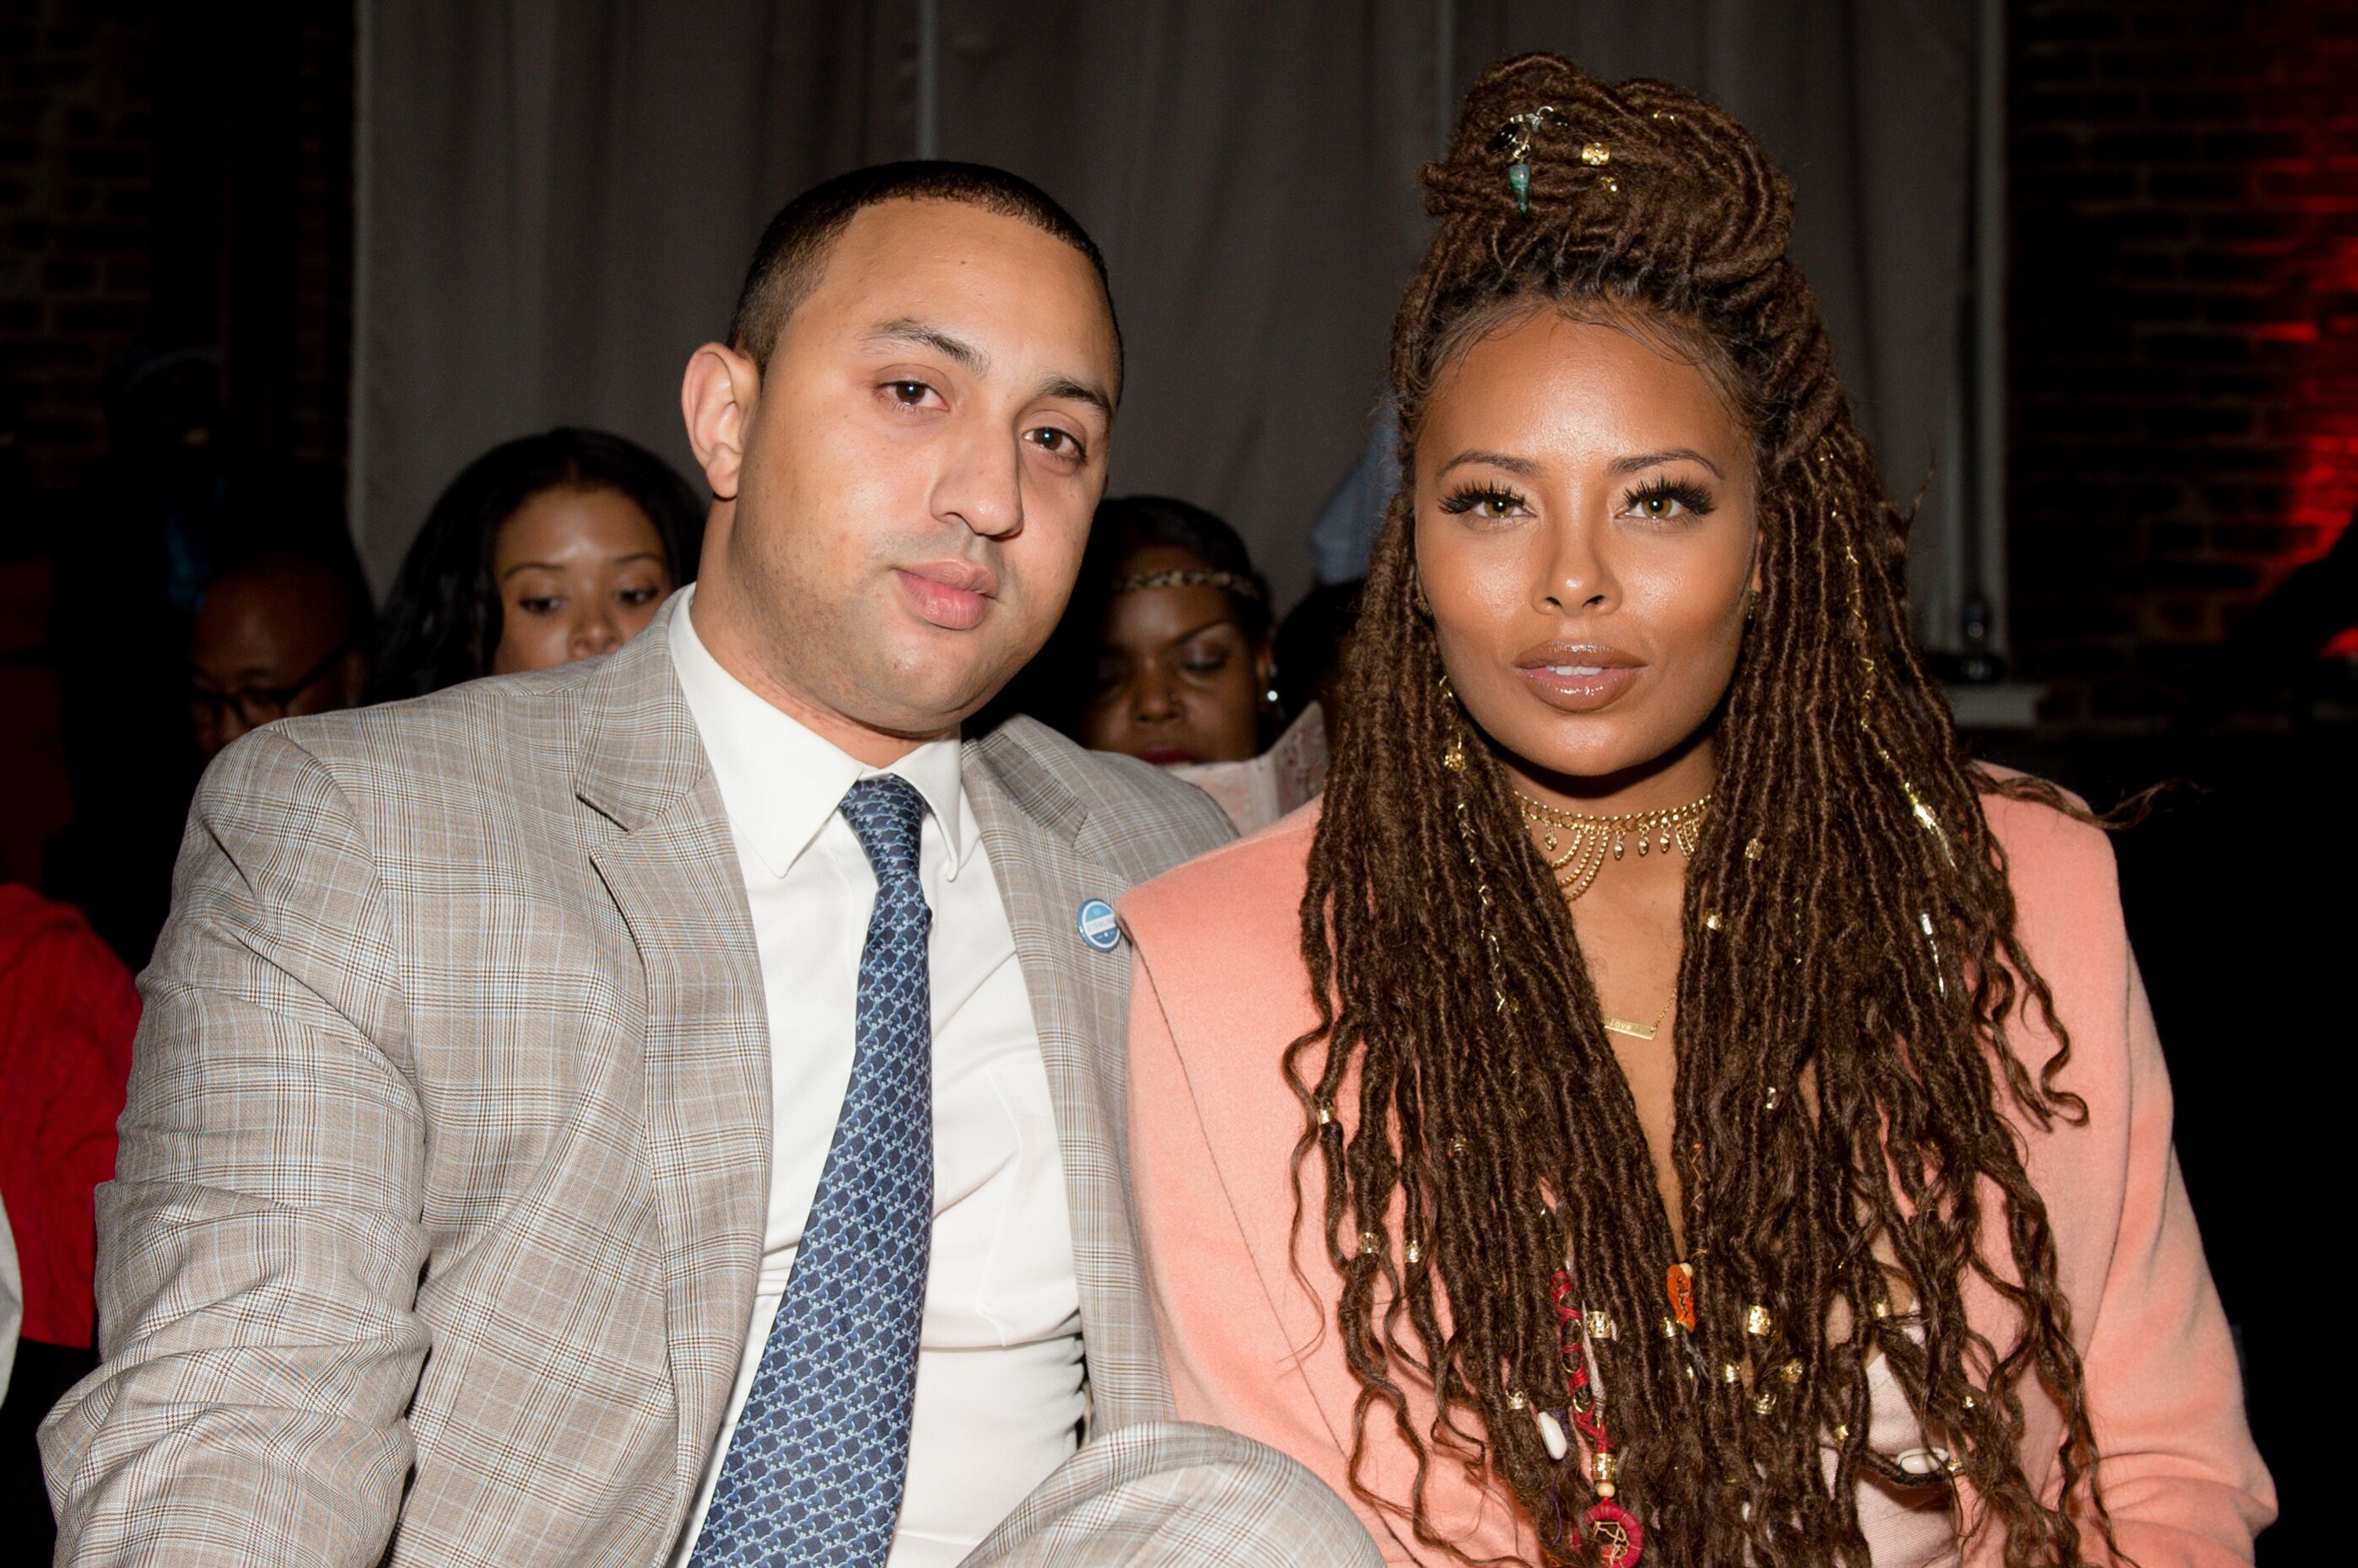 "Real Housewives of Atlanta" star Eva Marcille with husband Michael Sterling at a formal event | Source: Getty Images/GlobalImagesUkraine